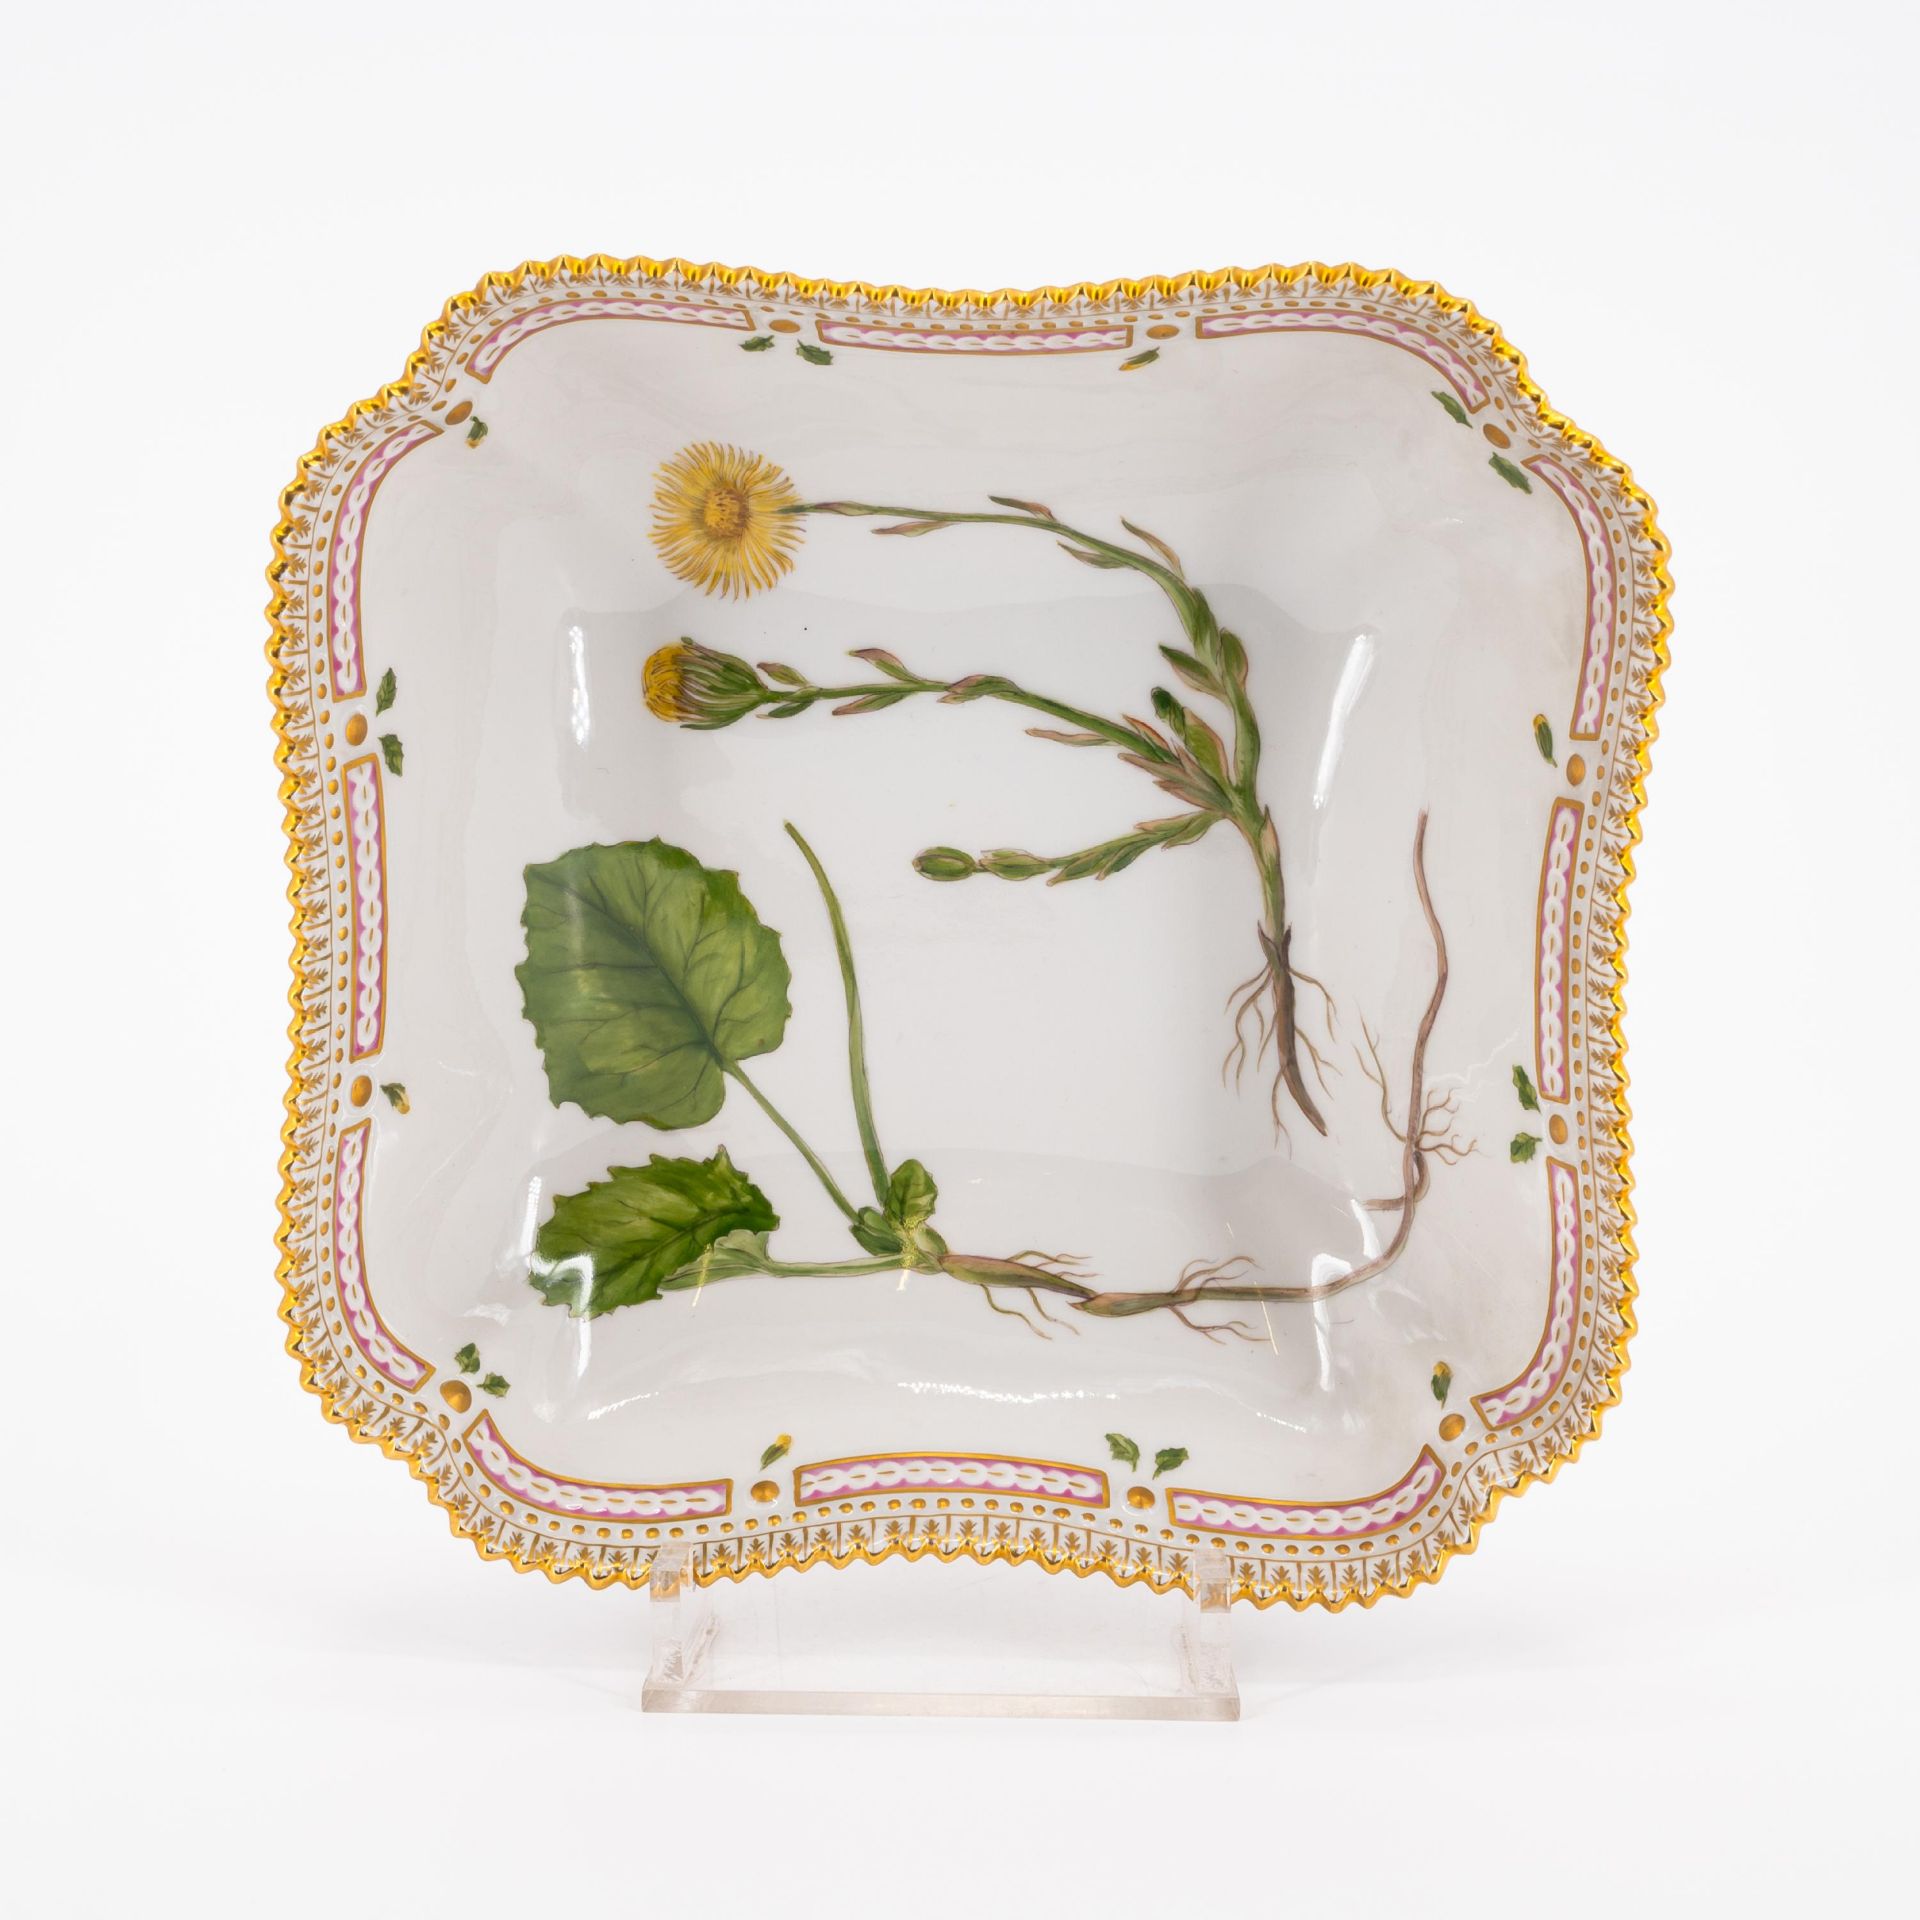 18 PIECES FROM A PORCELAIN DINNER SERVICE 'FLORA DANICA' - Image 11 of 26